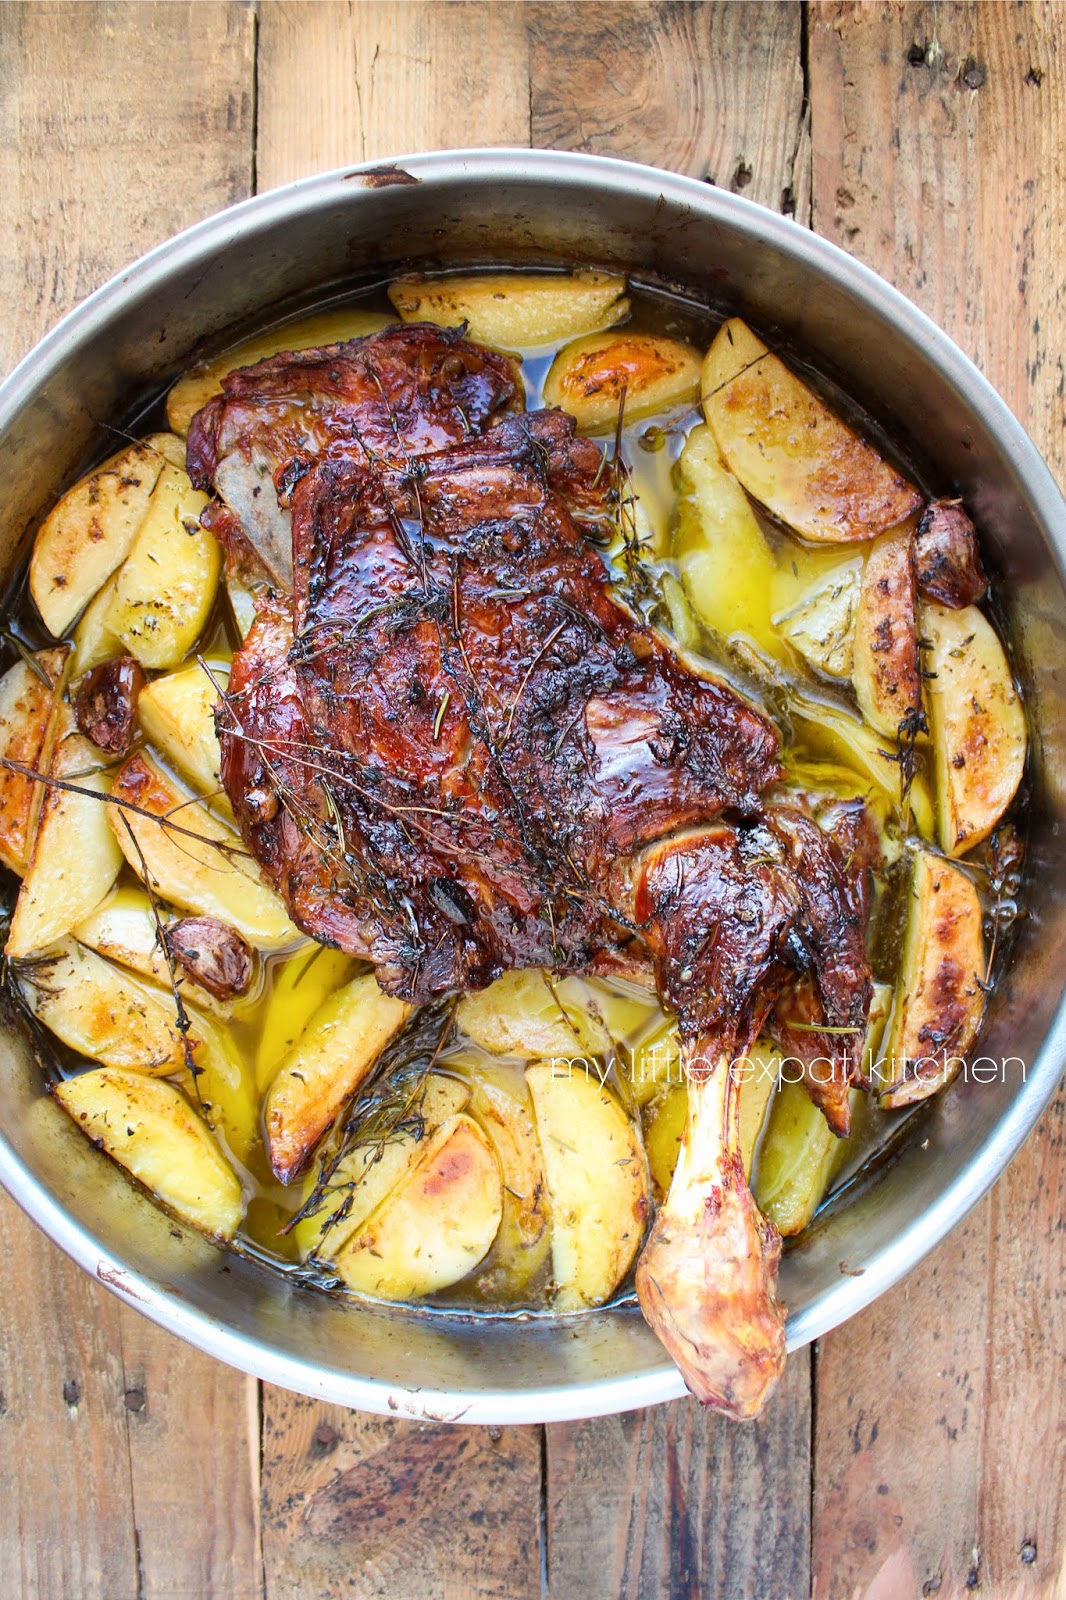 My Little Expat Kitchen: Greek slow-roasted lamb shoulder with potatoes ...